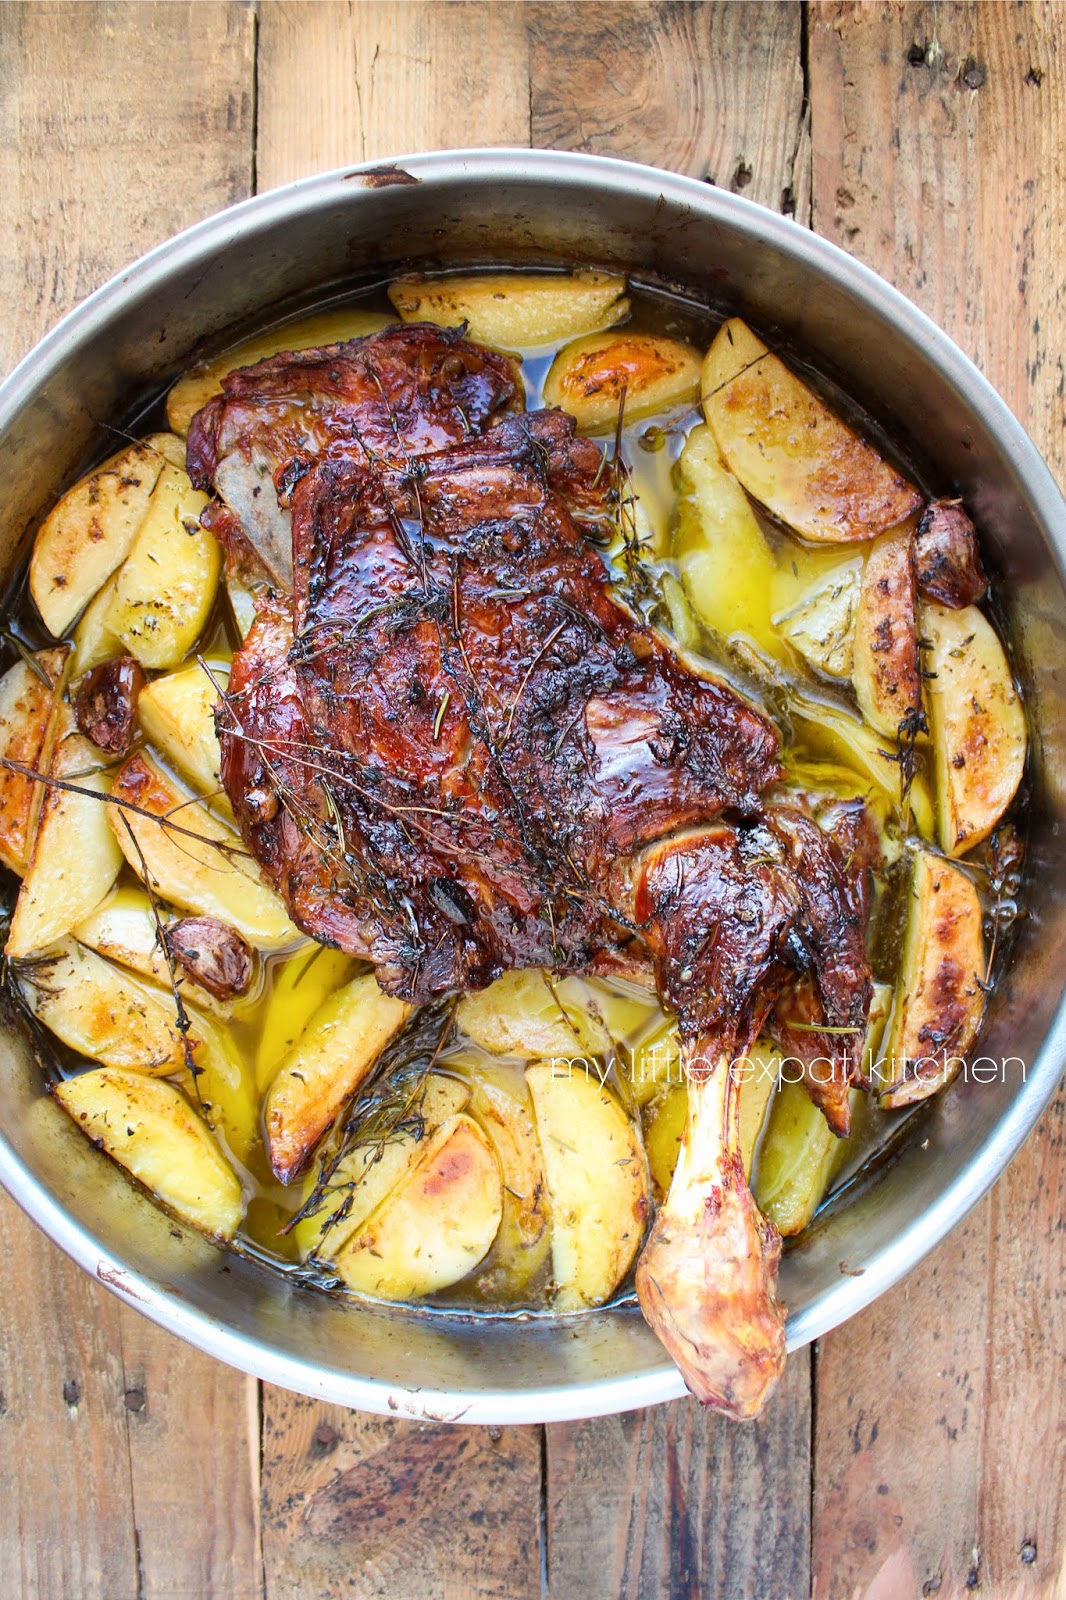 My Little Expat Kitchen: Greek slow-roasted lamb shoulder with potatoes ...